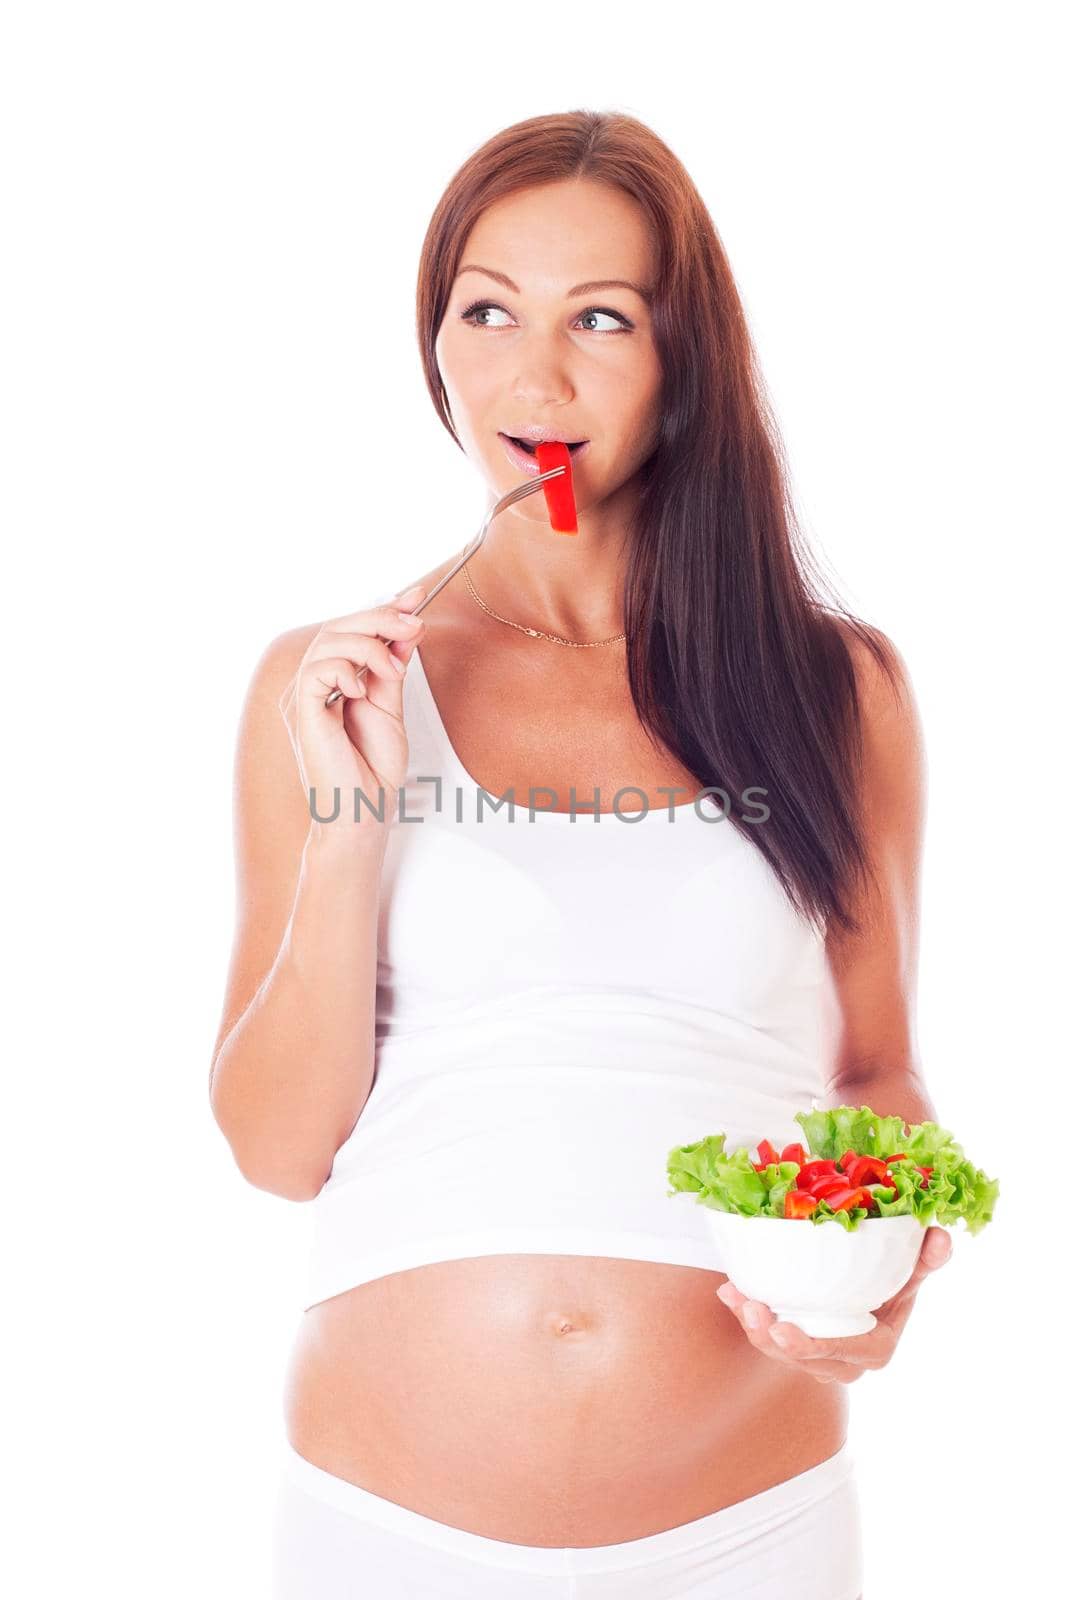 Pregnant woman eating salad. by Jyliana